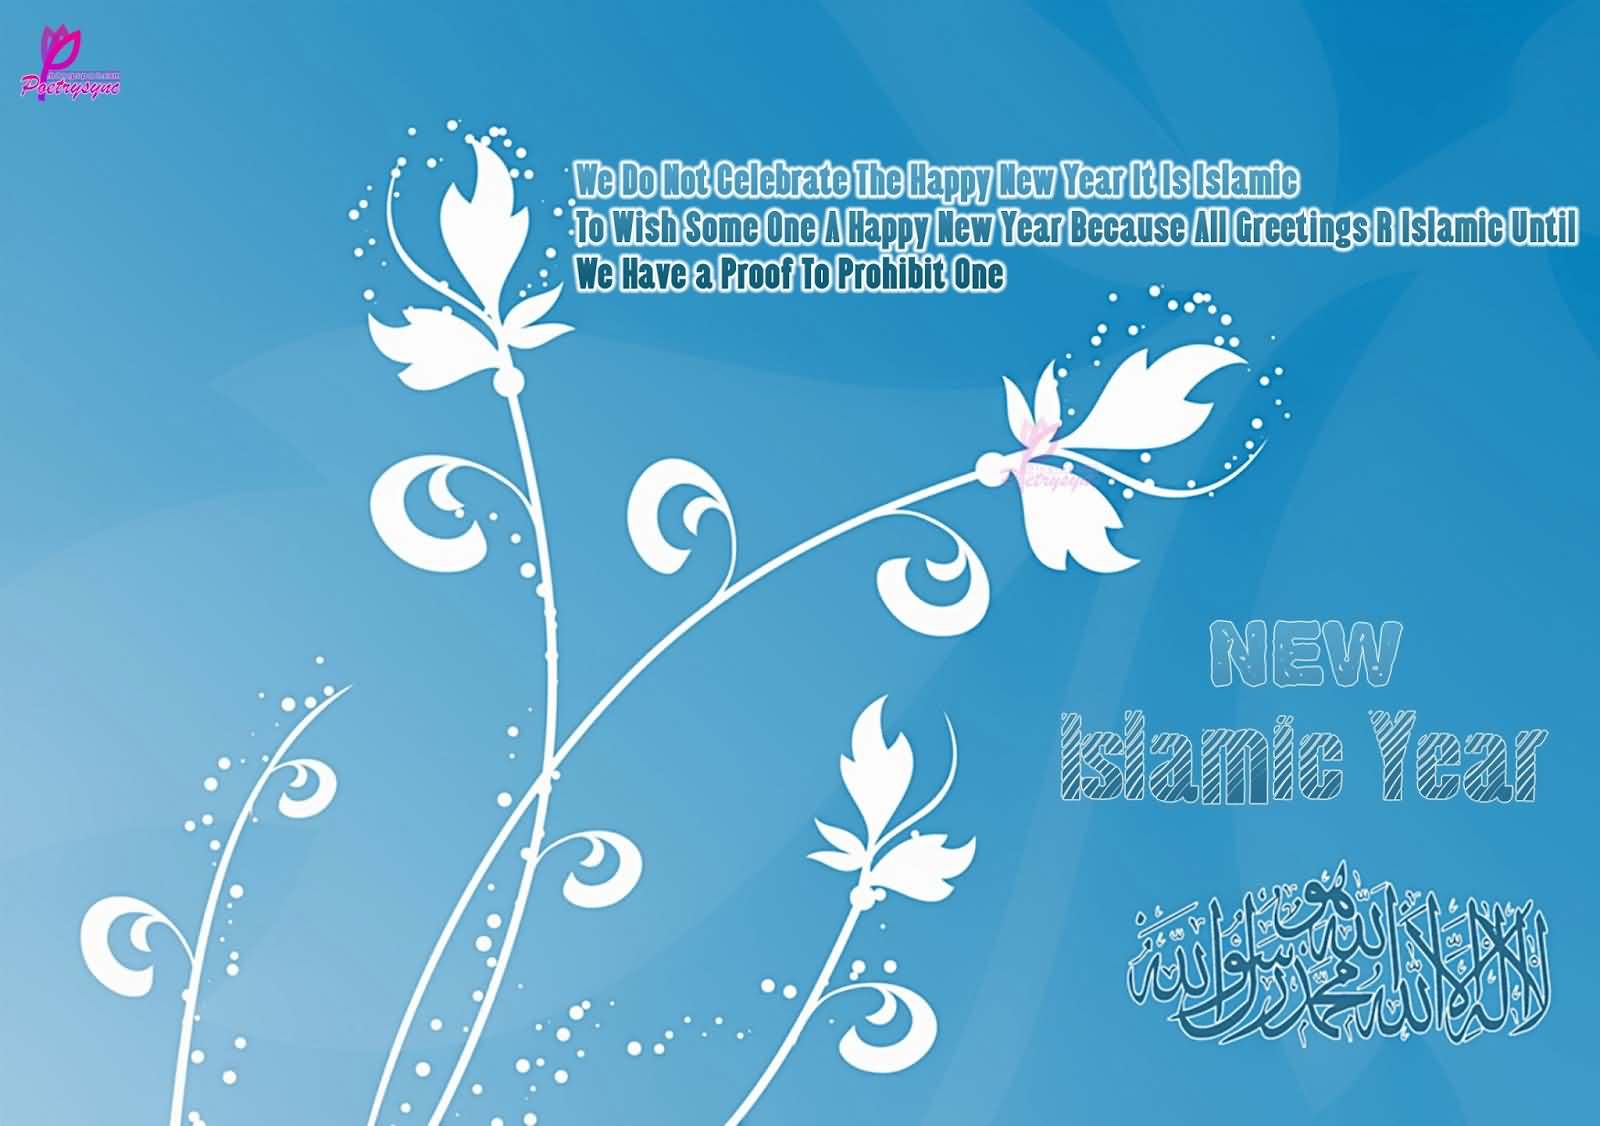 We Do Not Celebrate The Happy new year it is islamic to wish some one a happy new year because all greetings are islamic